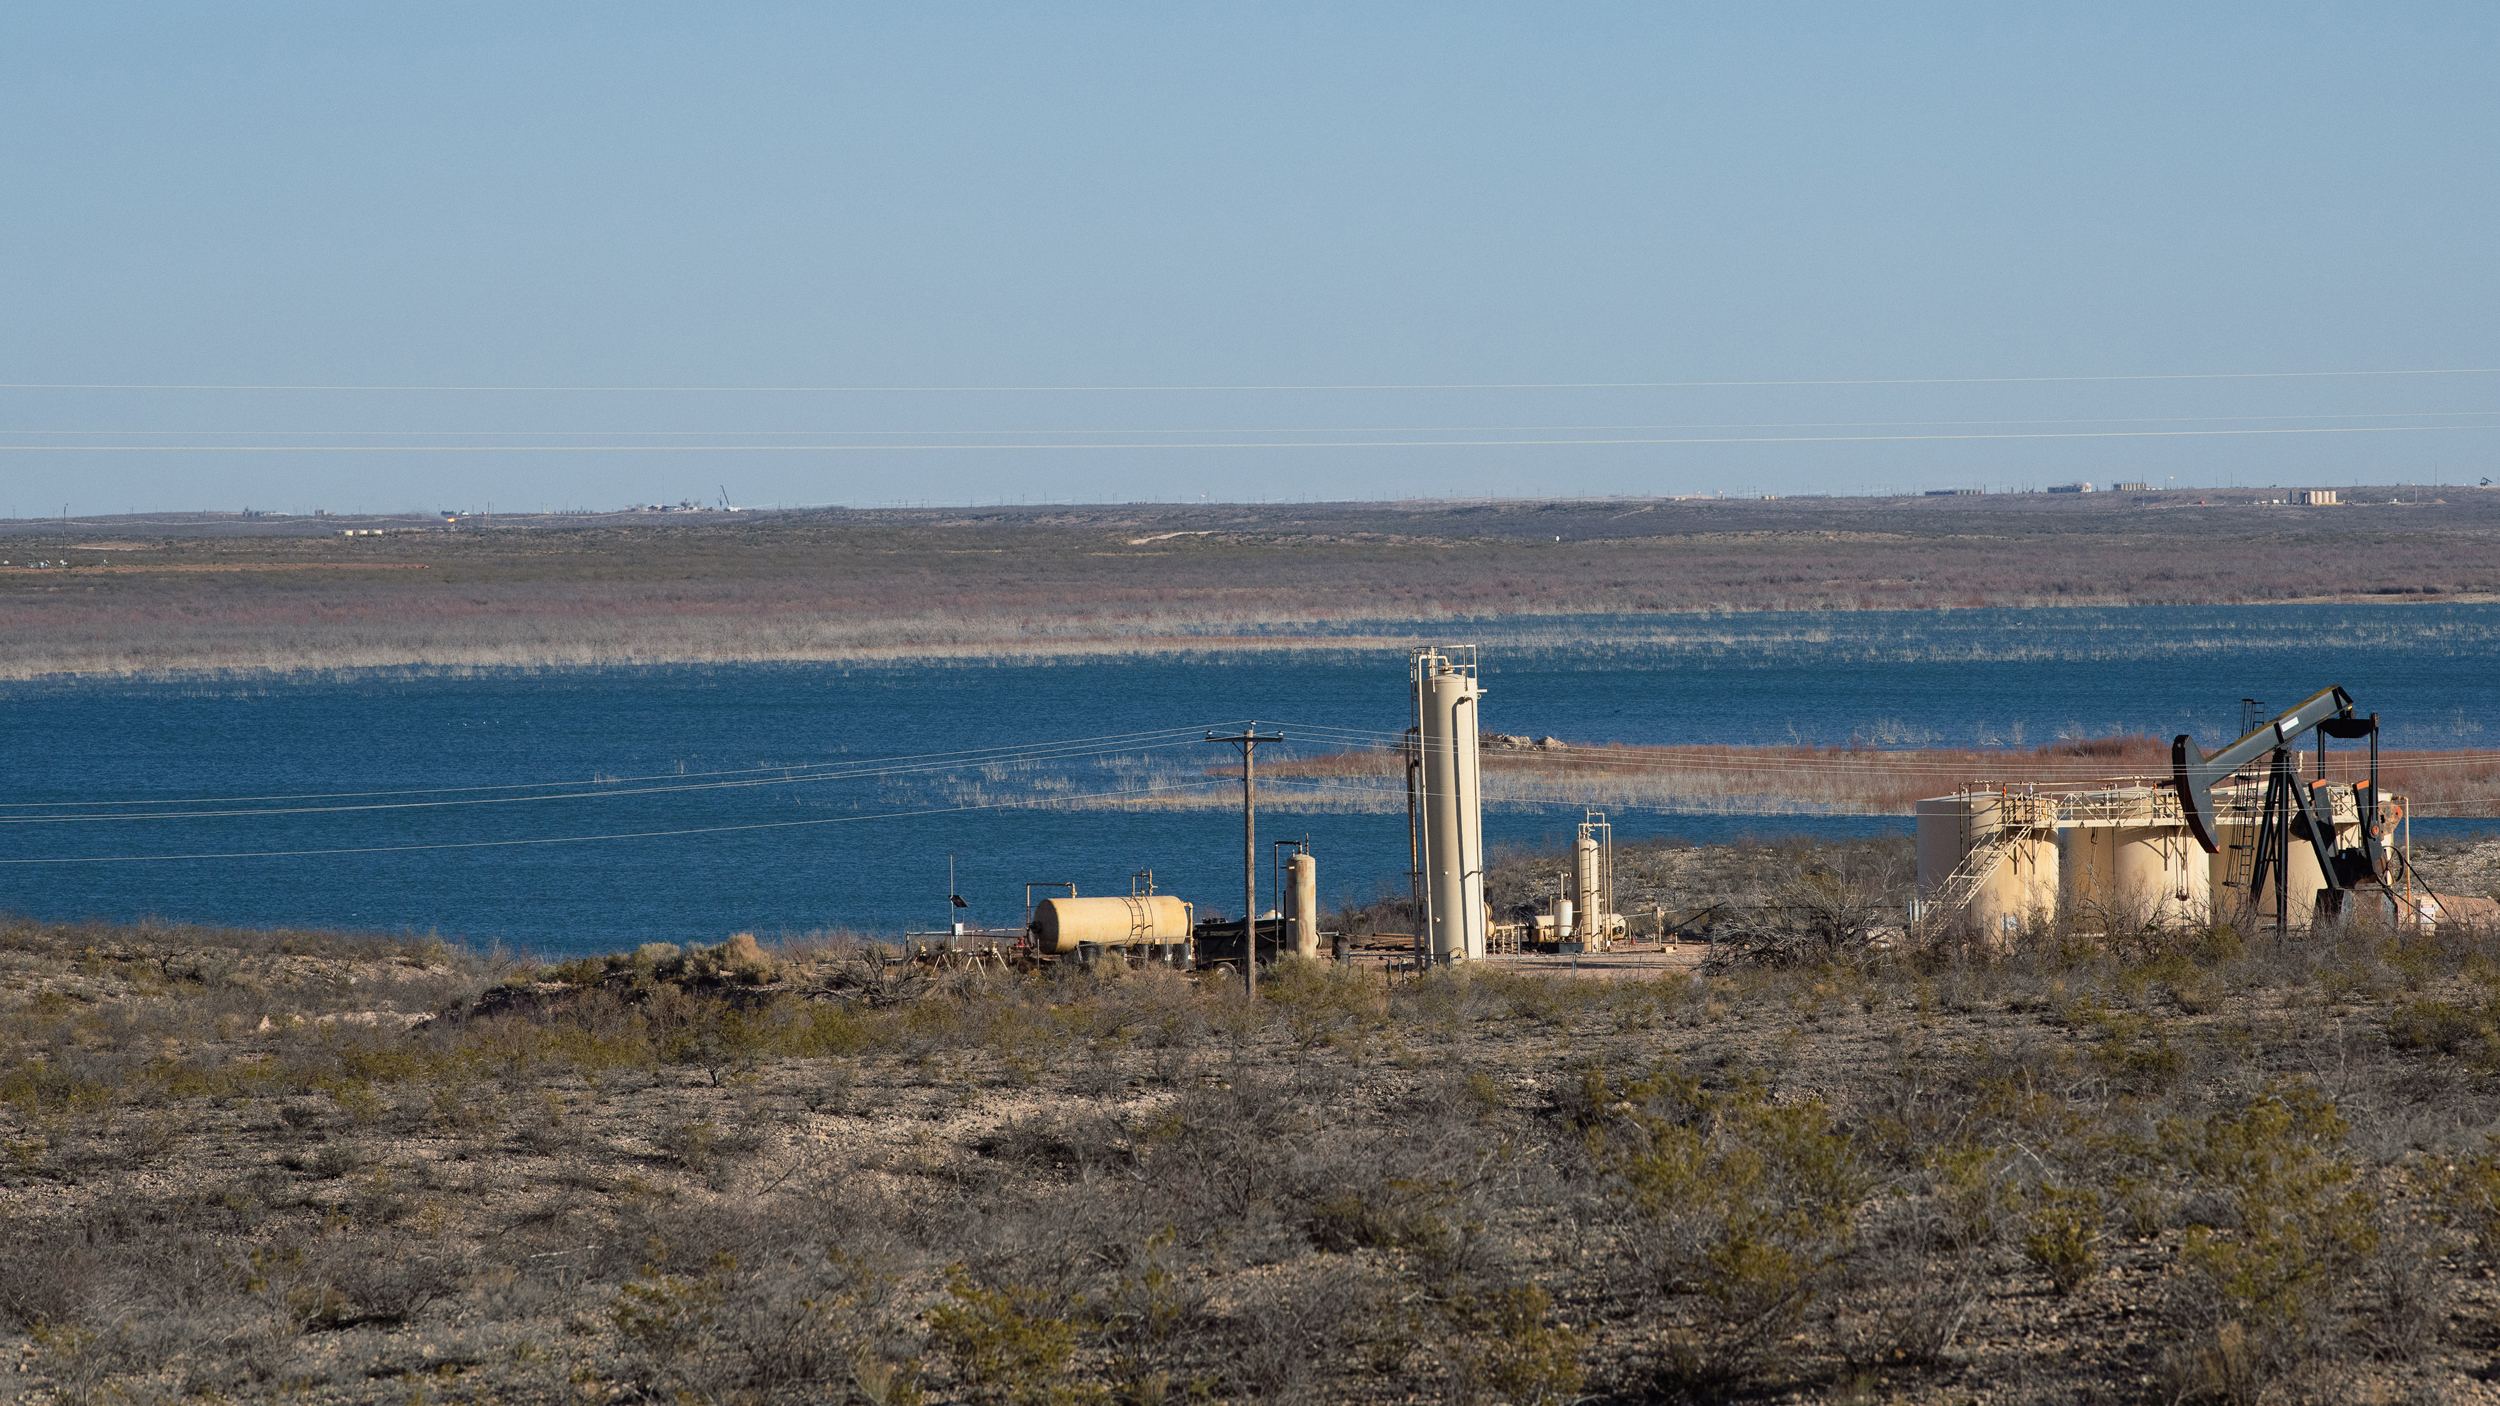 An oil drilling operation on the banks of the Red Bluff Reservoir in Reeves County, Texas on May 27, 2020. Credit: Justin Hamel